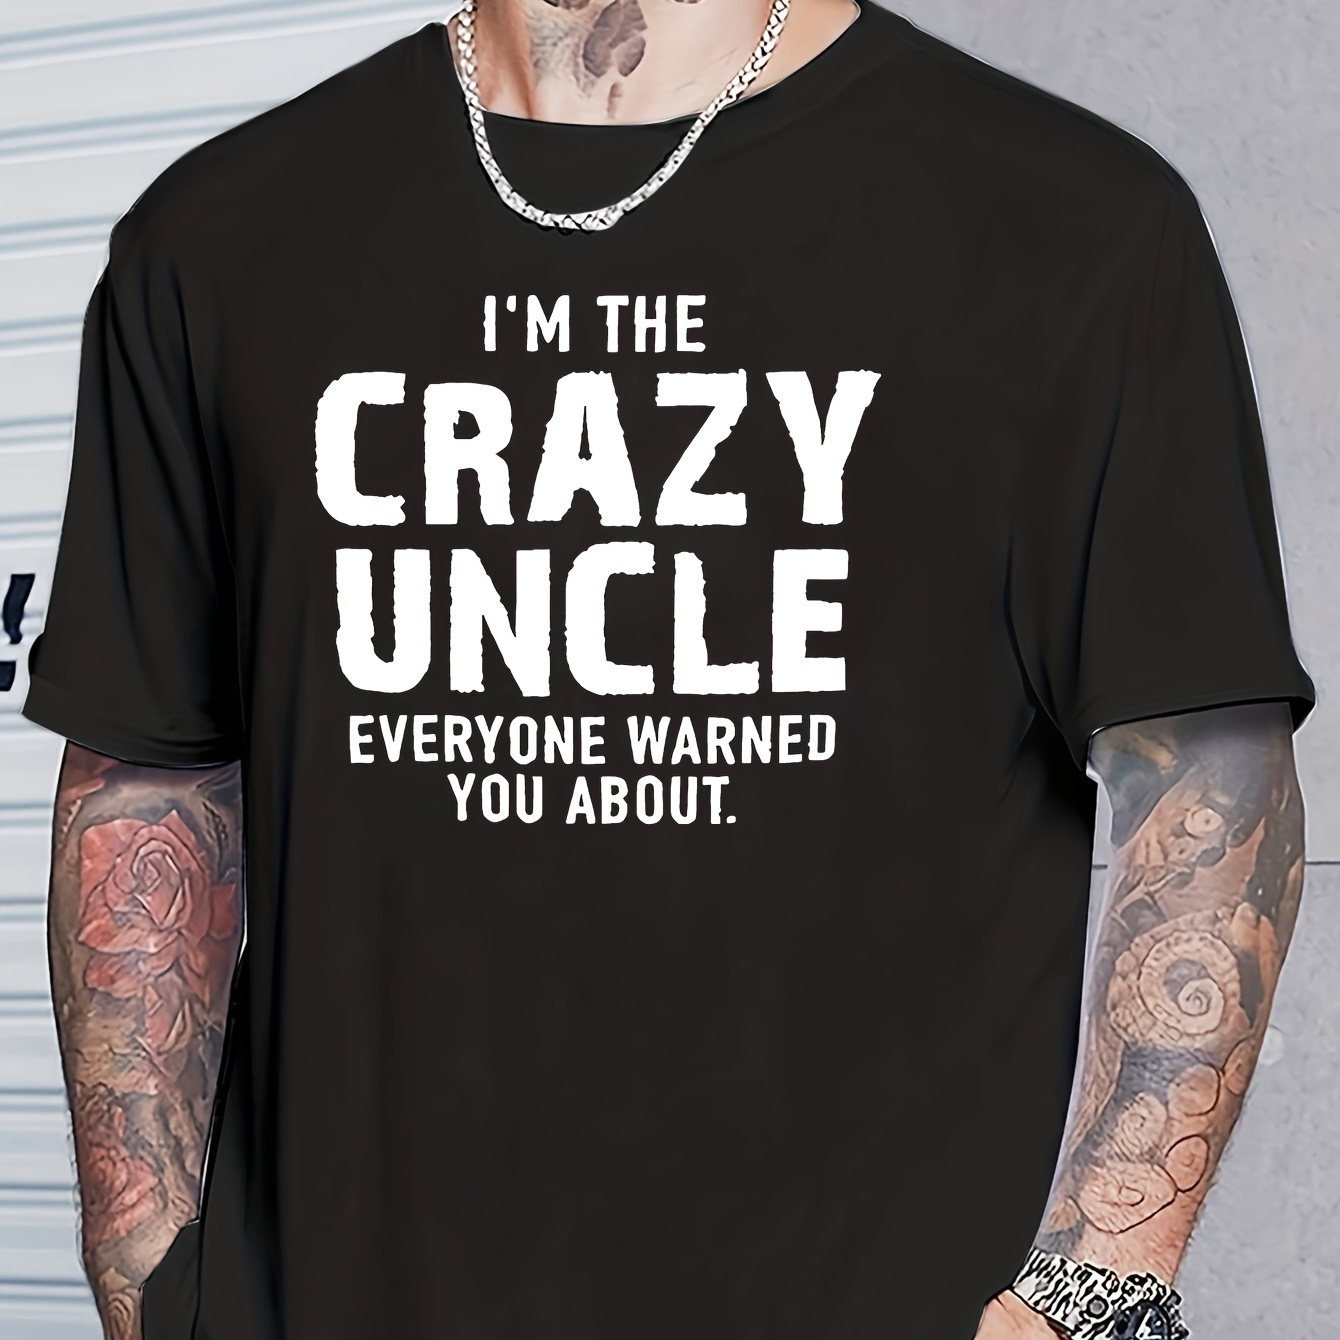 

I'm The Crazy Uncle" Creative Print Casual Novelty T-shirt For Men, Short Sleeve Summer& Spring Top, Comfort Fit, Stylish Streetwear Crew Neck Tee For Daily Wear